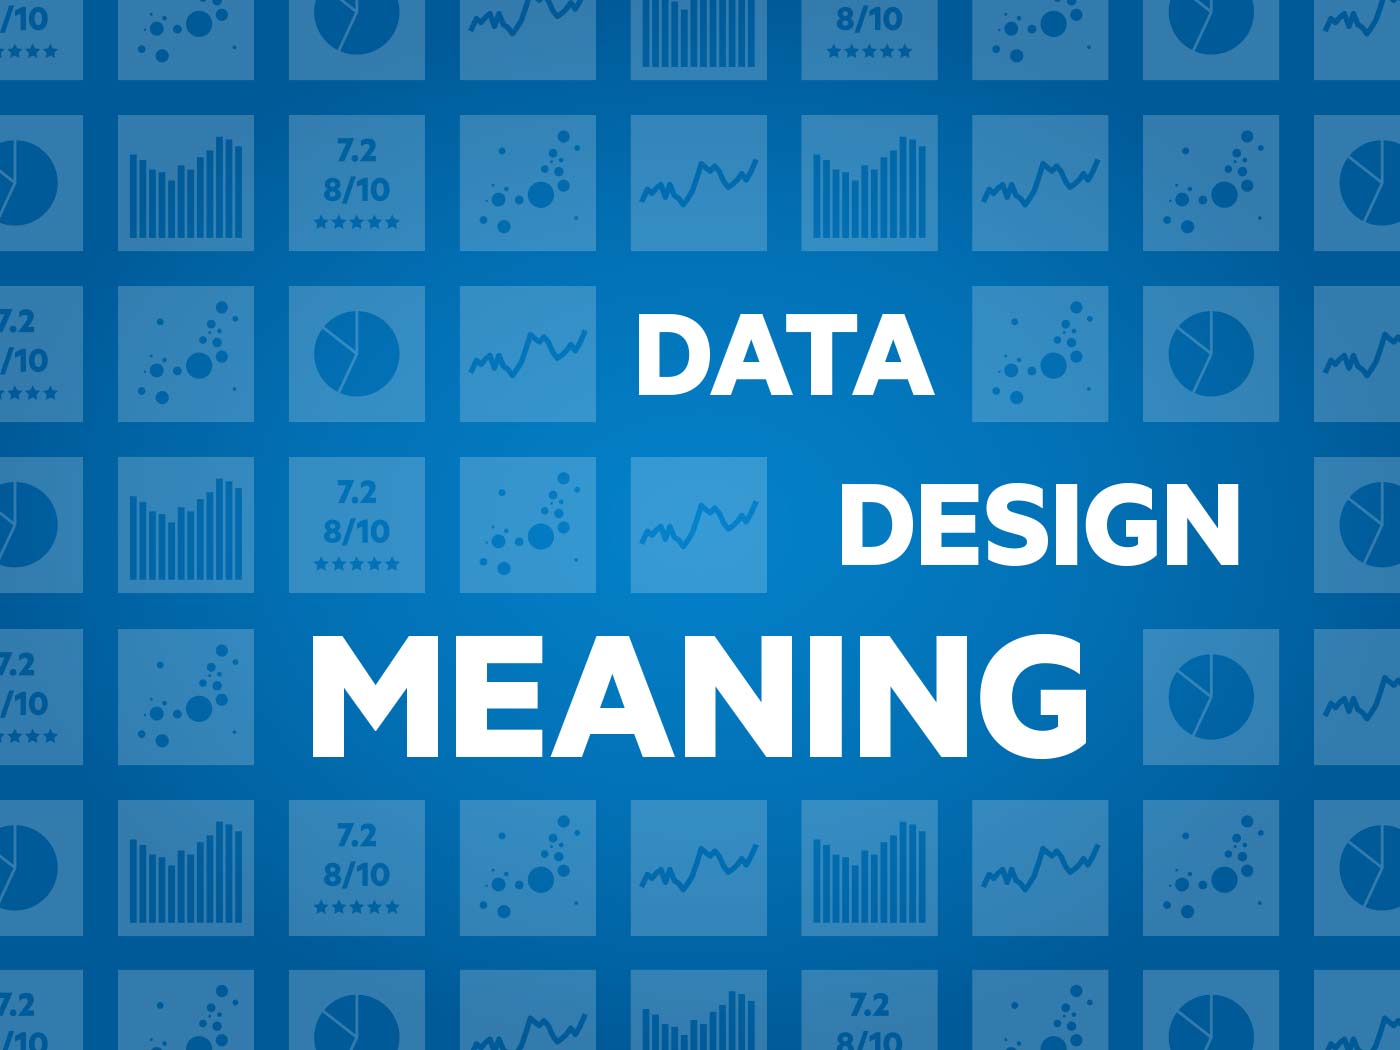 pycon_data_design_meaning-1